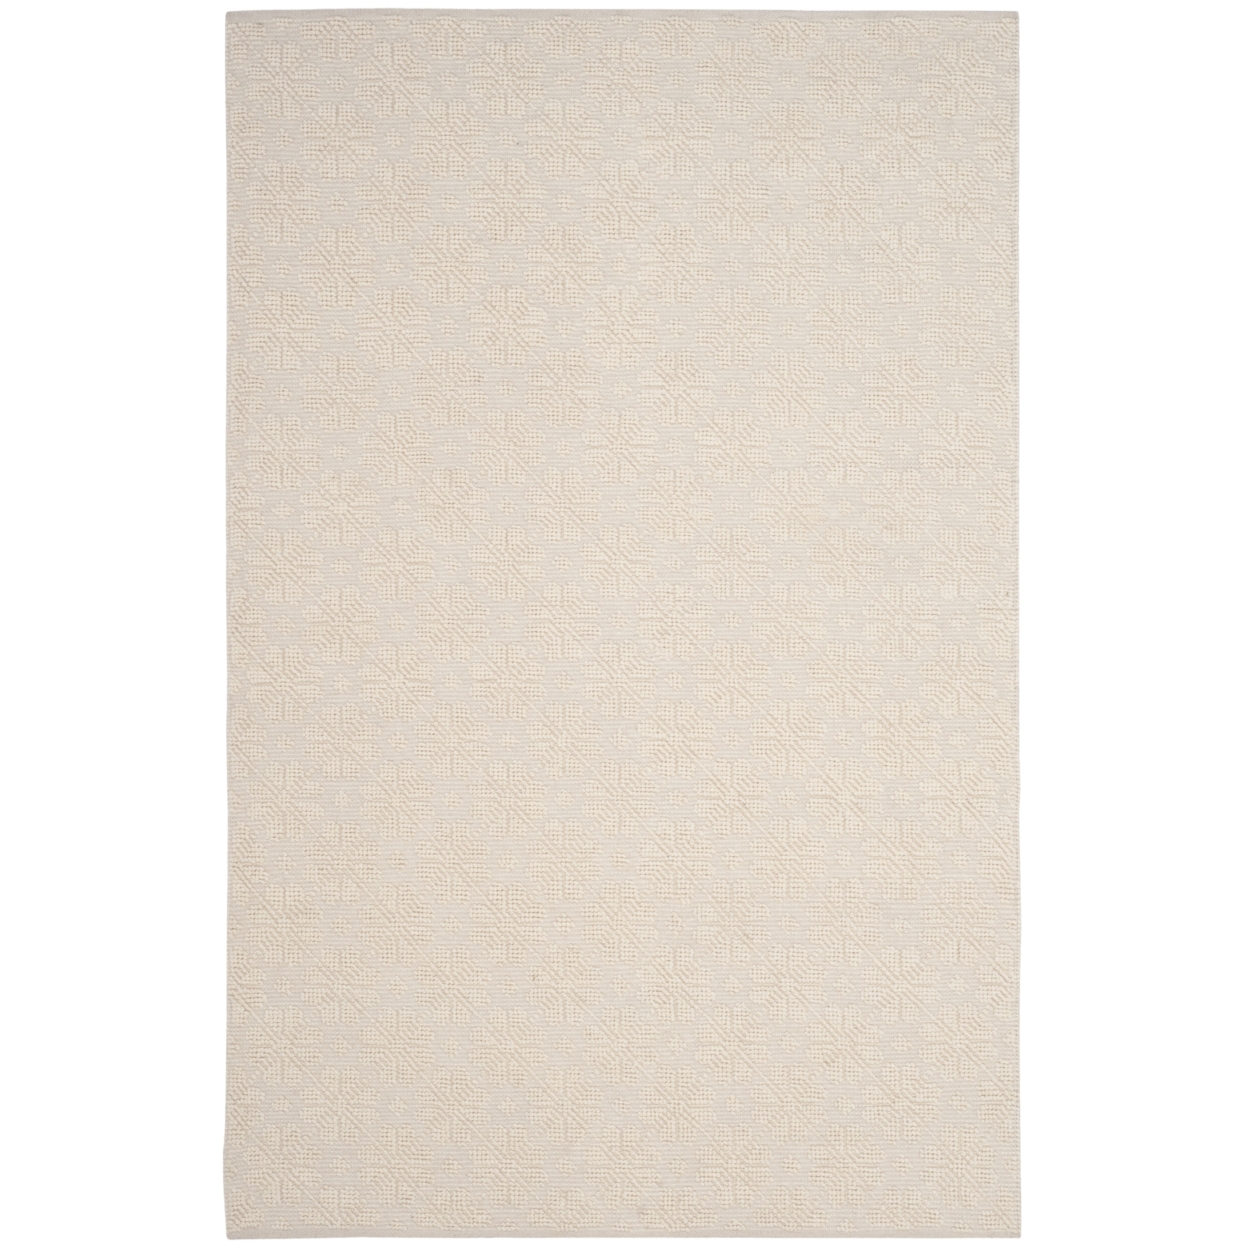 SAFAVIEH Vermont Collection VRM106A Handwoven Ivory Rug - 5 X 8